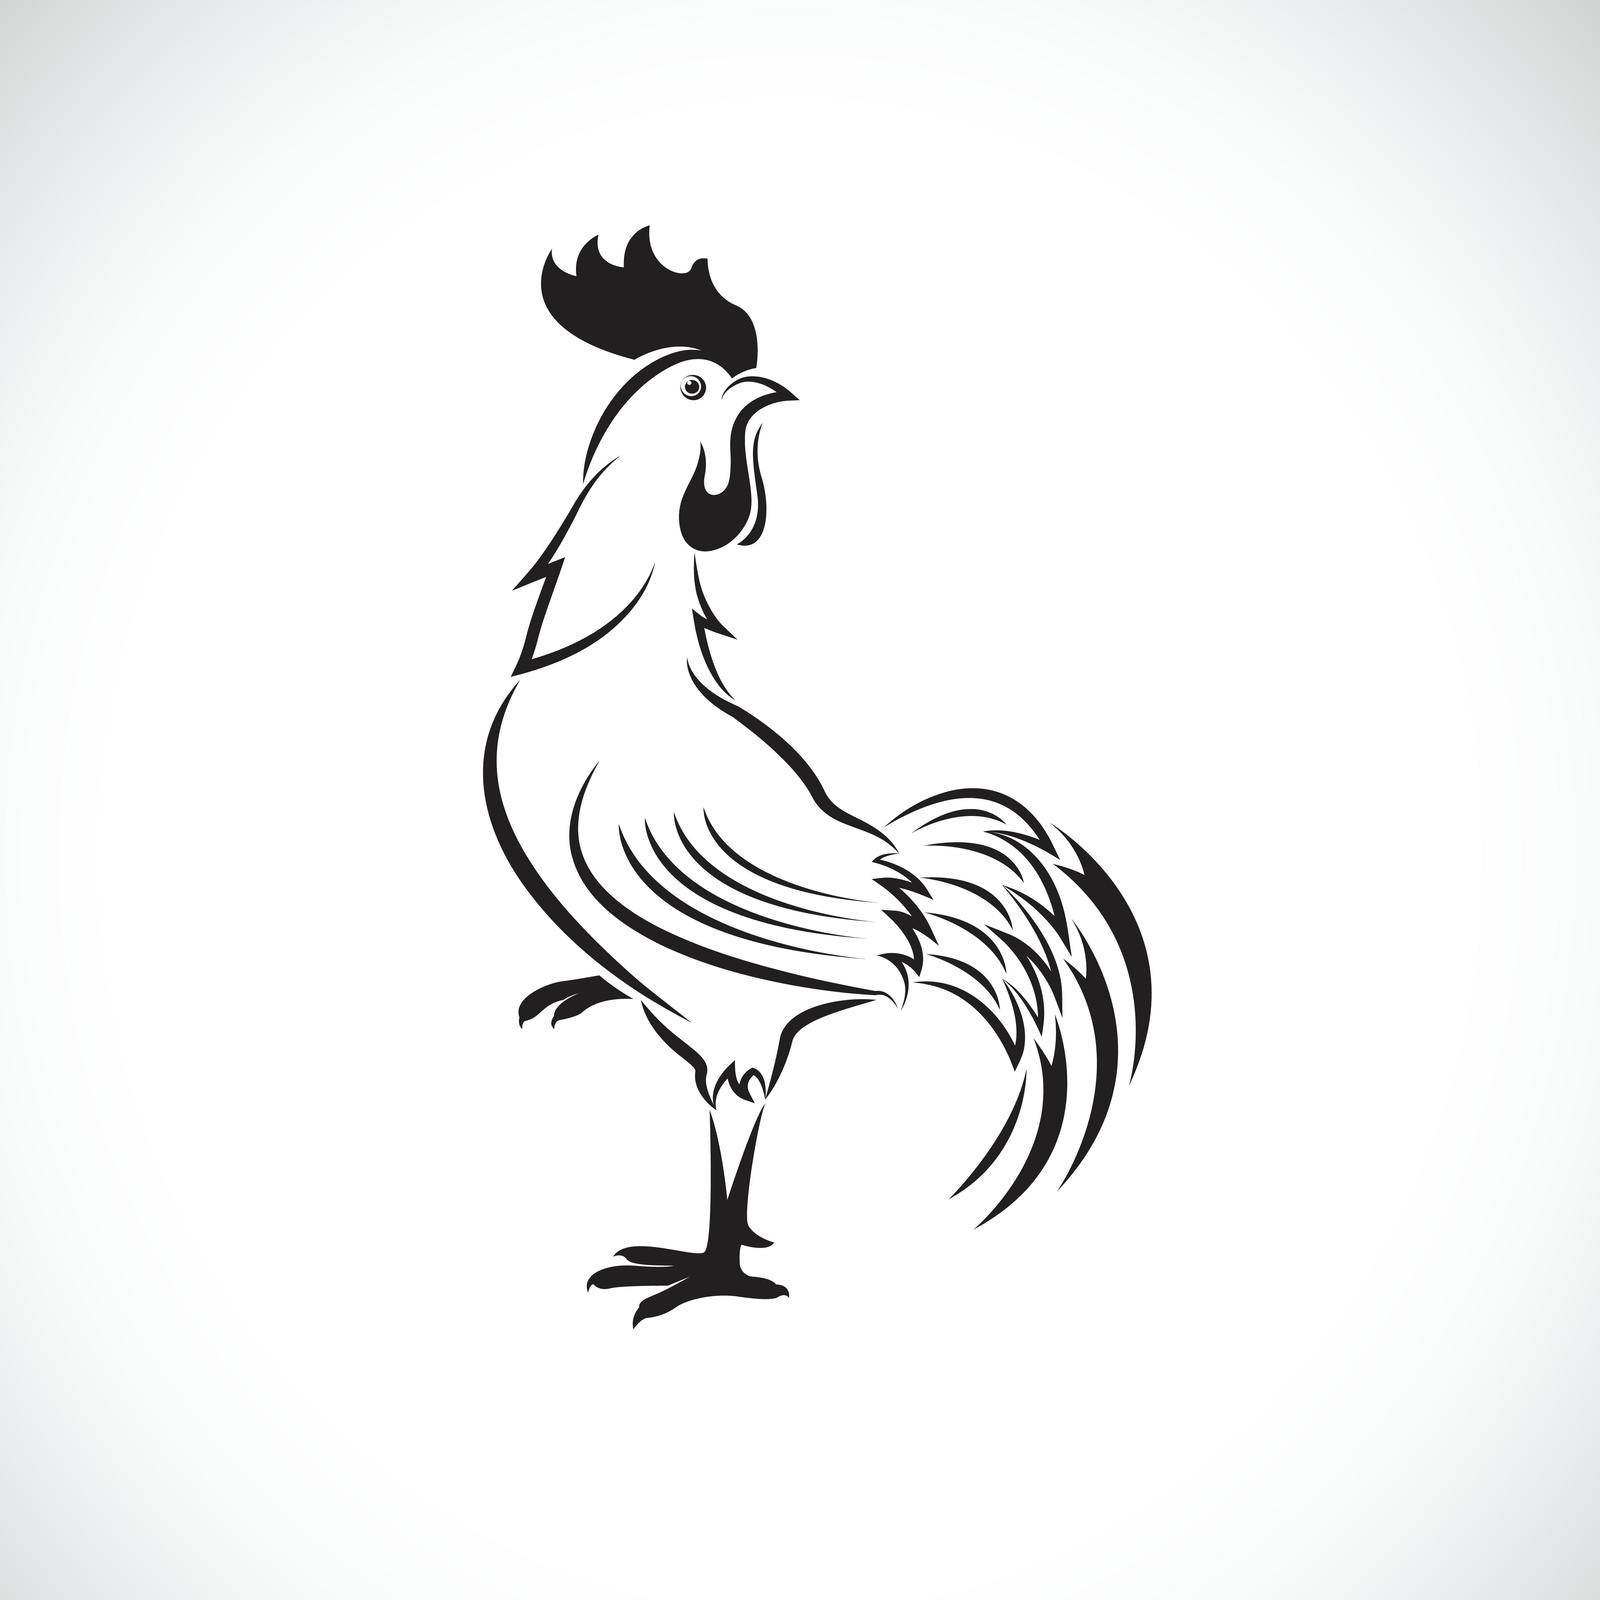 Vector of cock or rooster design on white background. Easy editable layered vector illustration. Farm Animals. by yod67